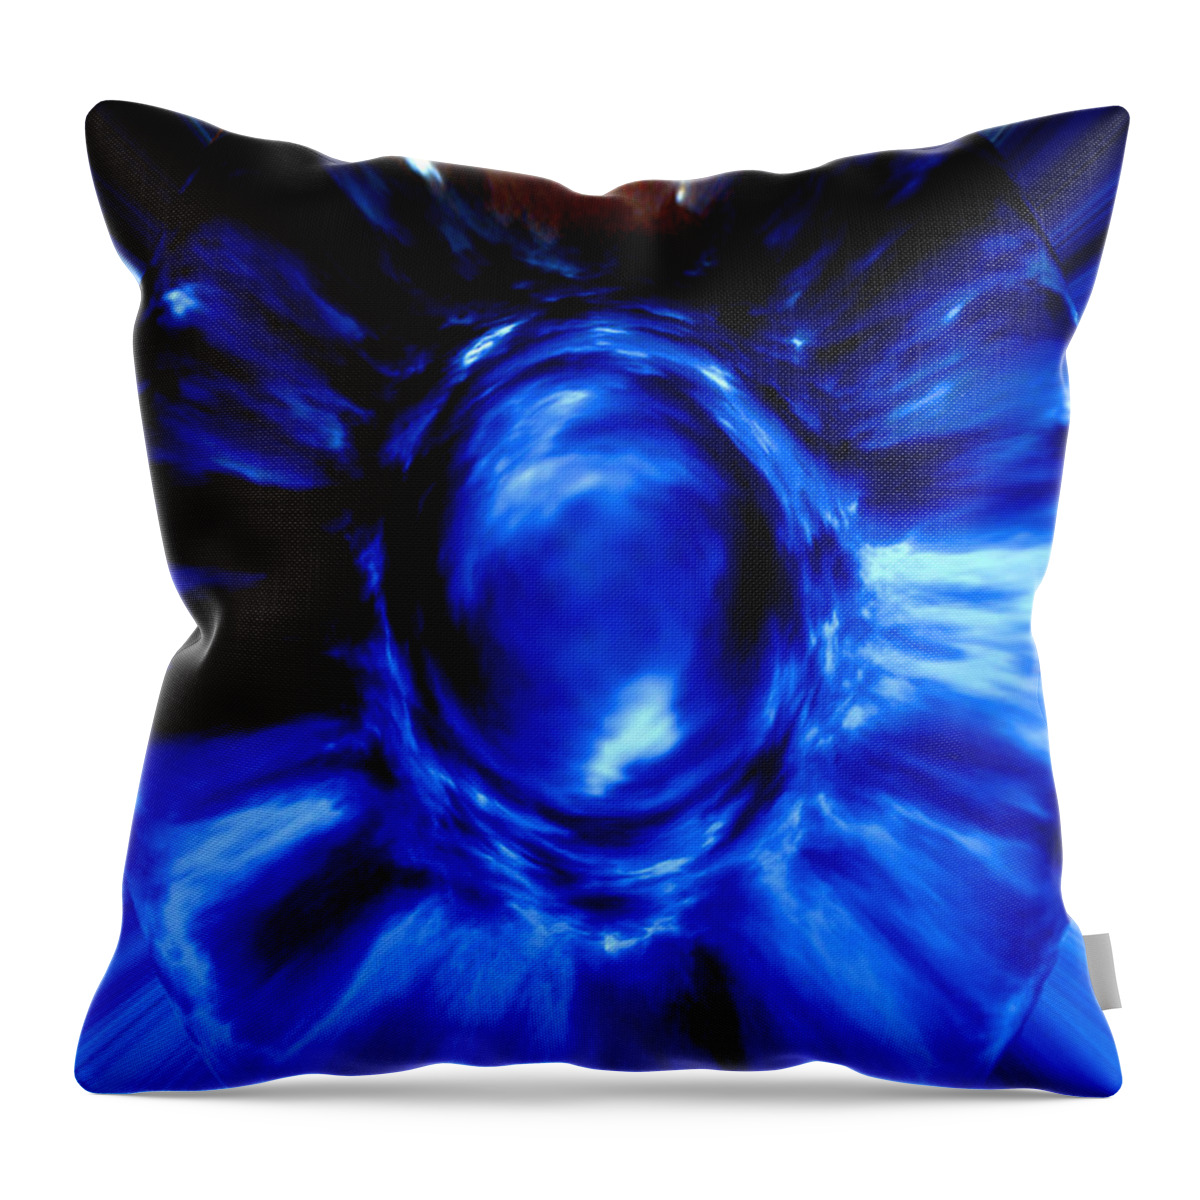 Blue Throw Pillow featuring the digital art Birth of Blue by Donna Proctor